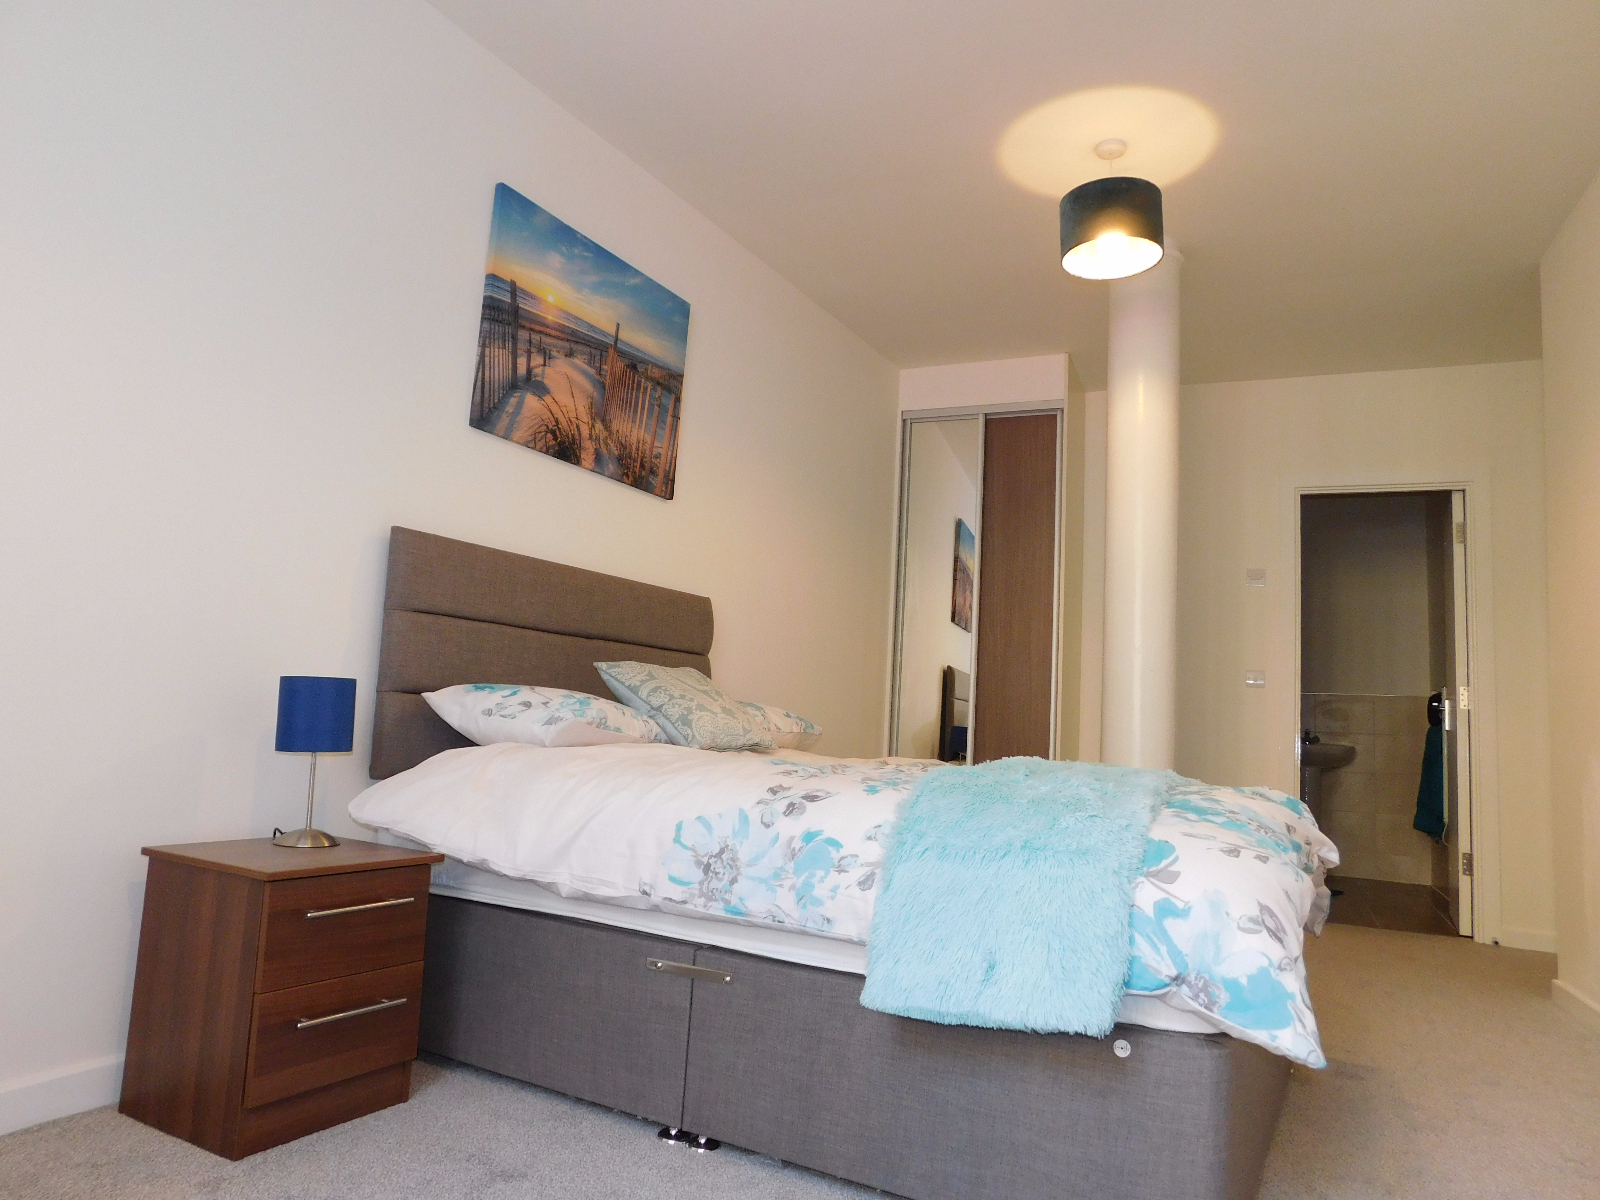 Charming and Fabulous double bedroom en suite for rent in Spitalfiled London RoomsLocal image